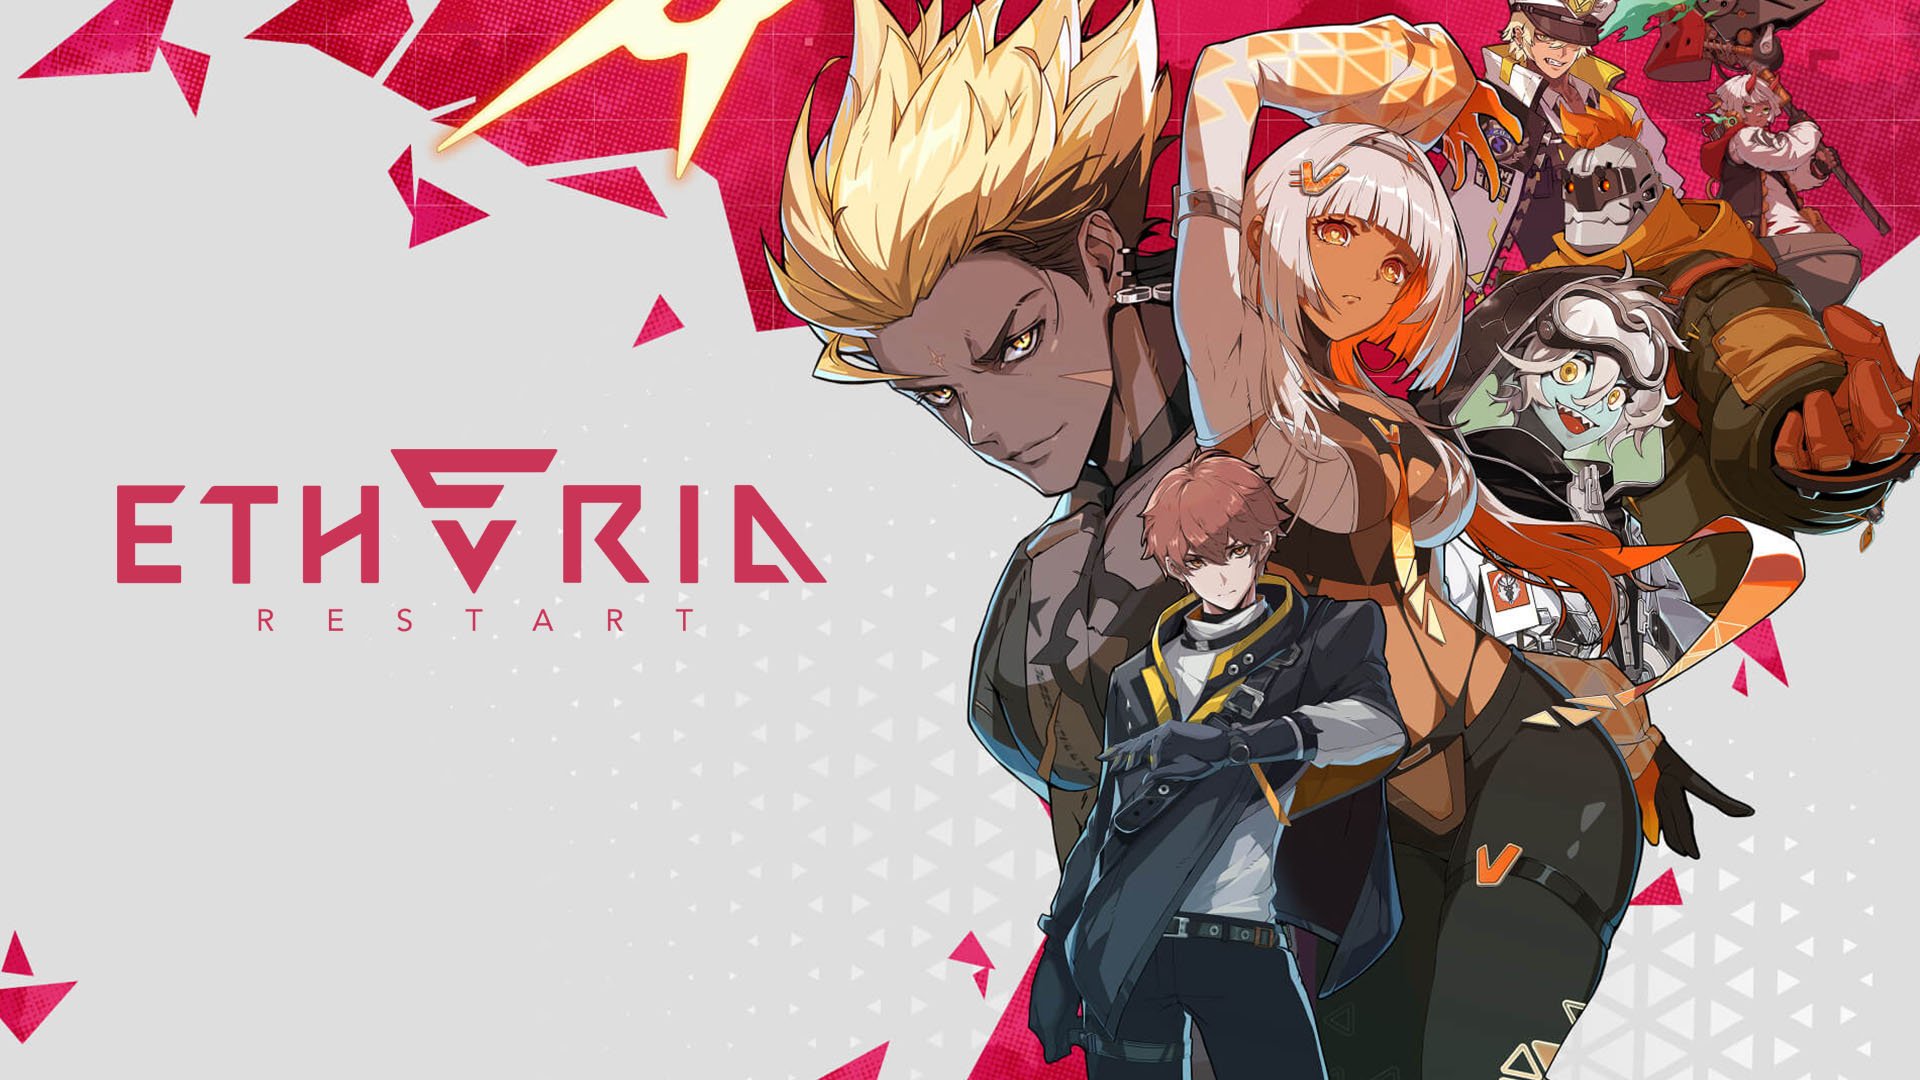 #
      Free-to-play turn-based action RPG Etheria: Restart announced for PC, iOS, and Android